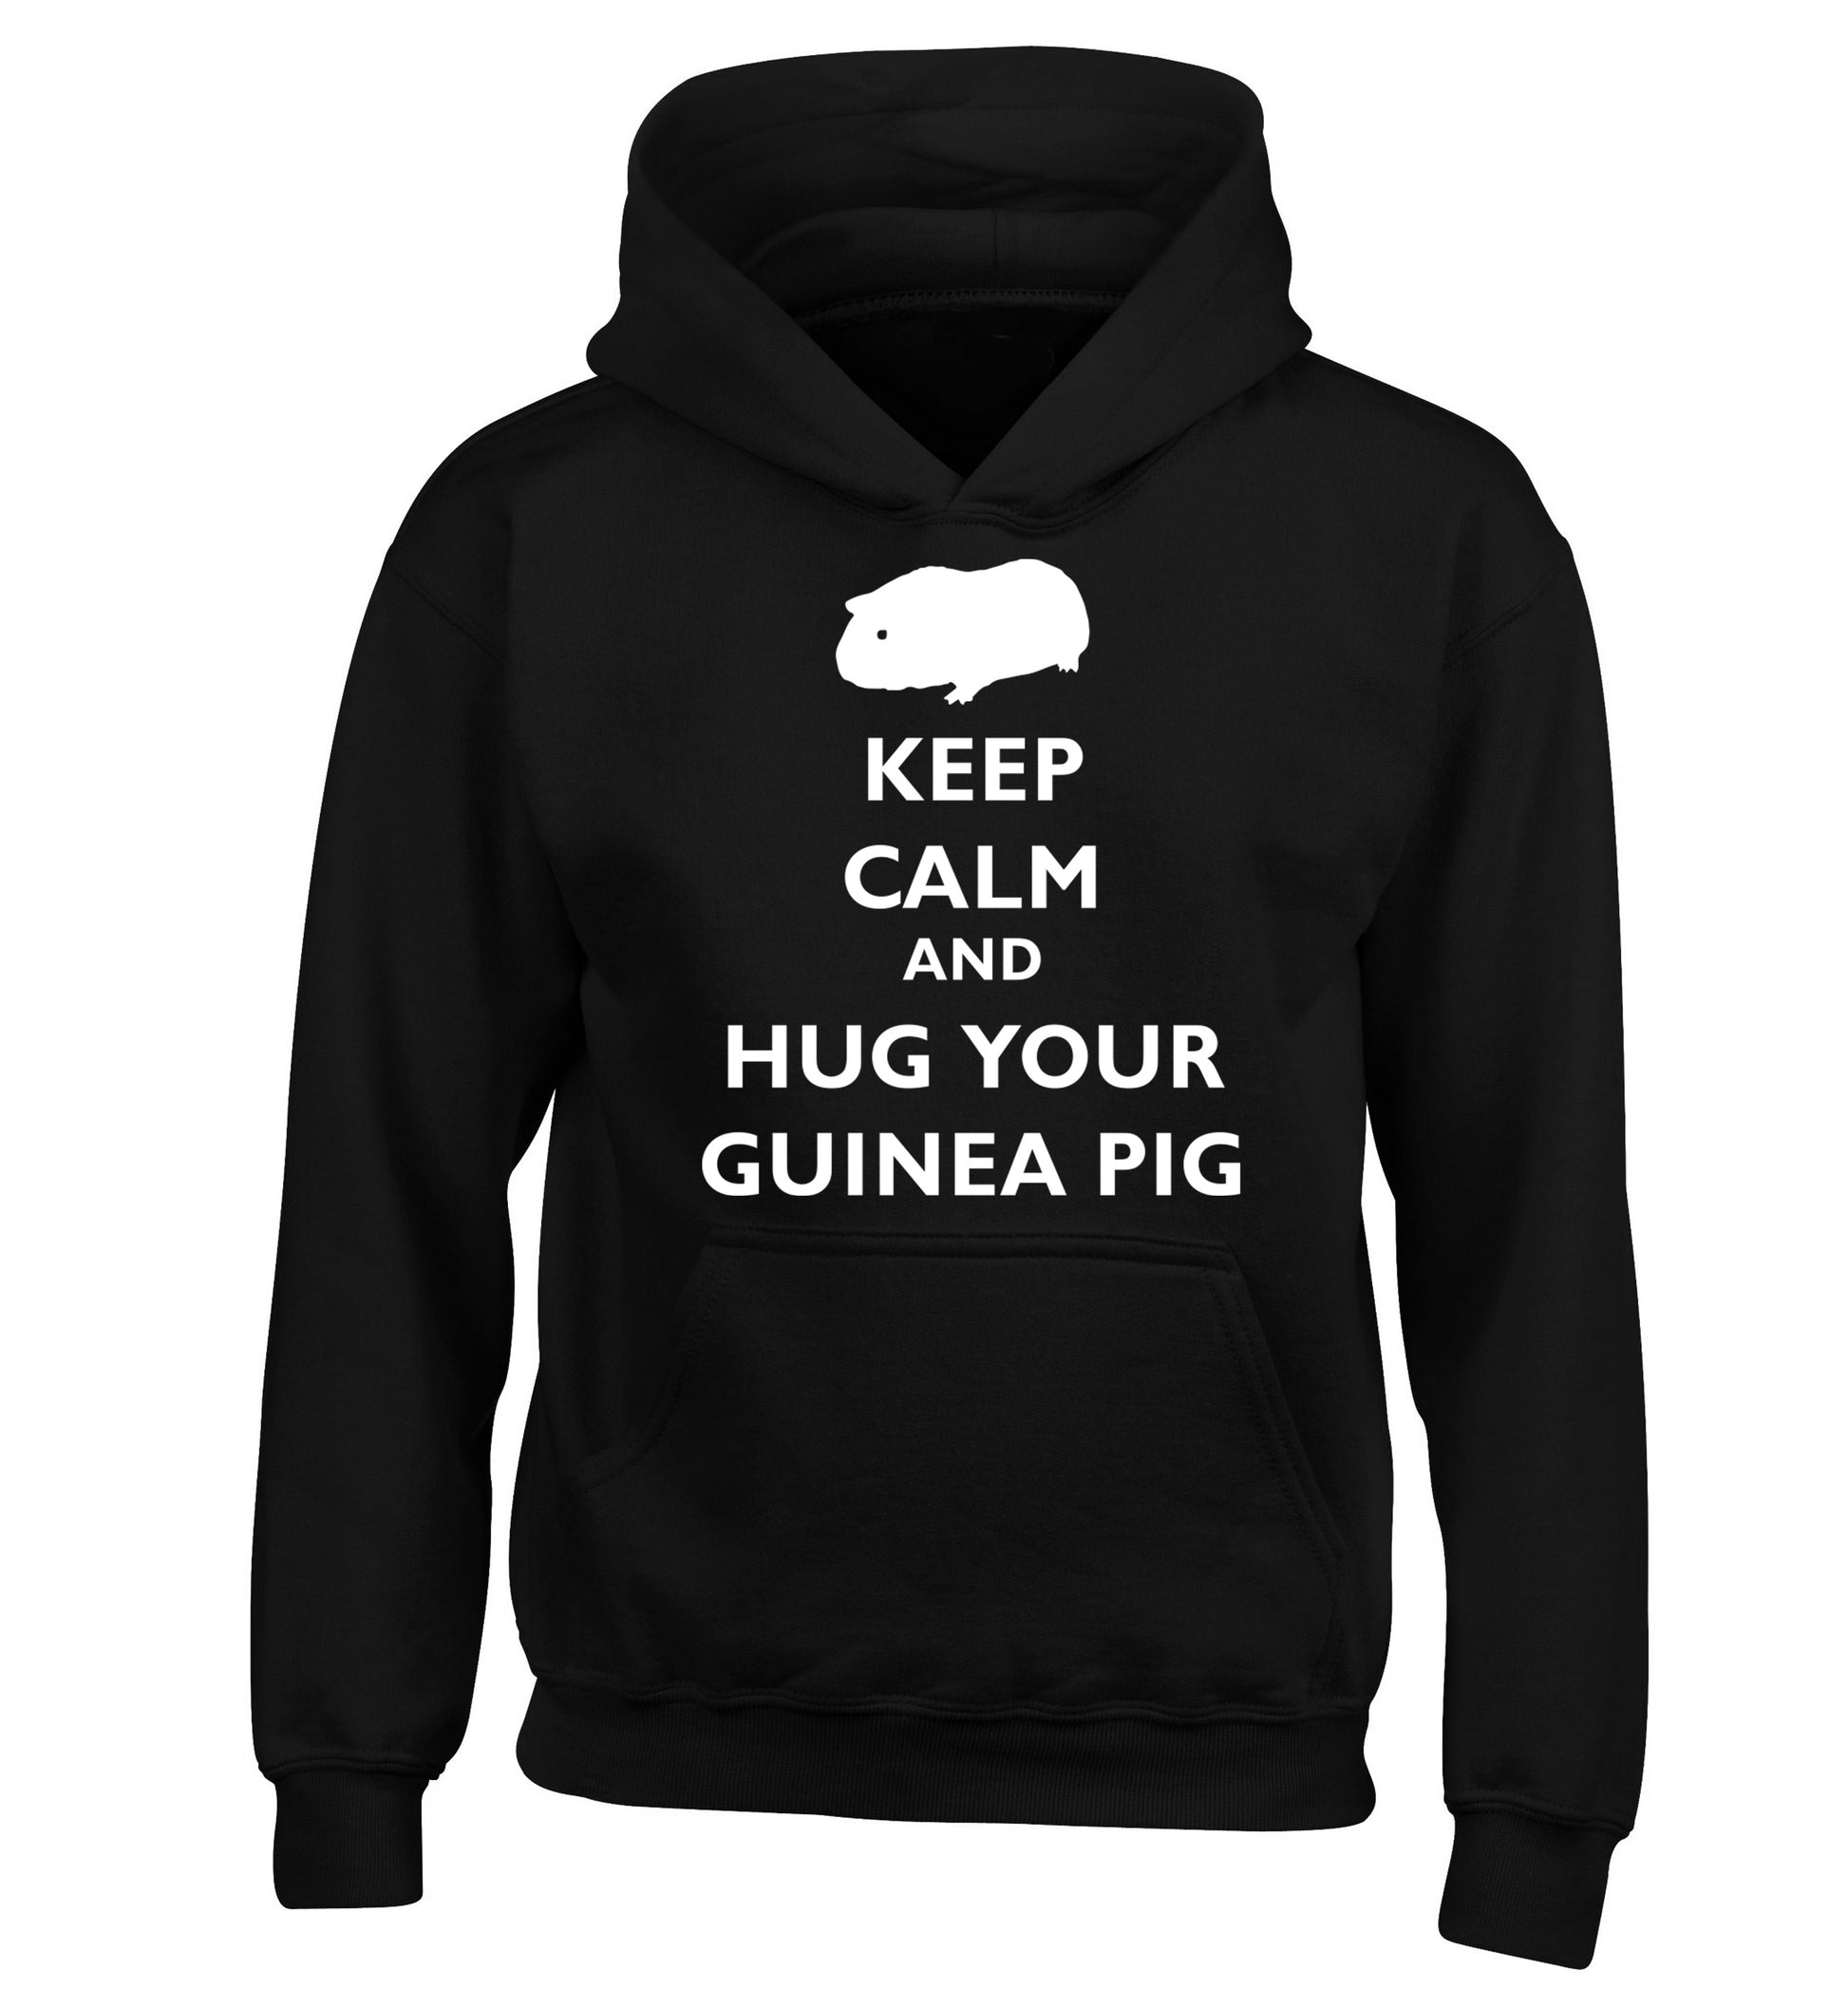 Keep calm and hug your guineapig children's black hoodie 12-13 Years